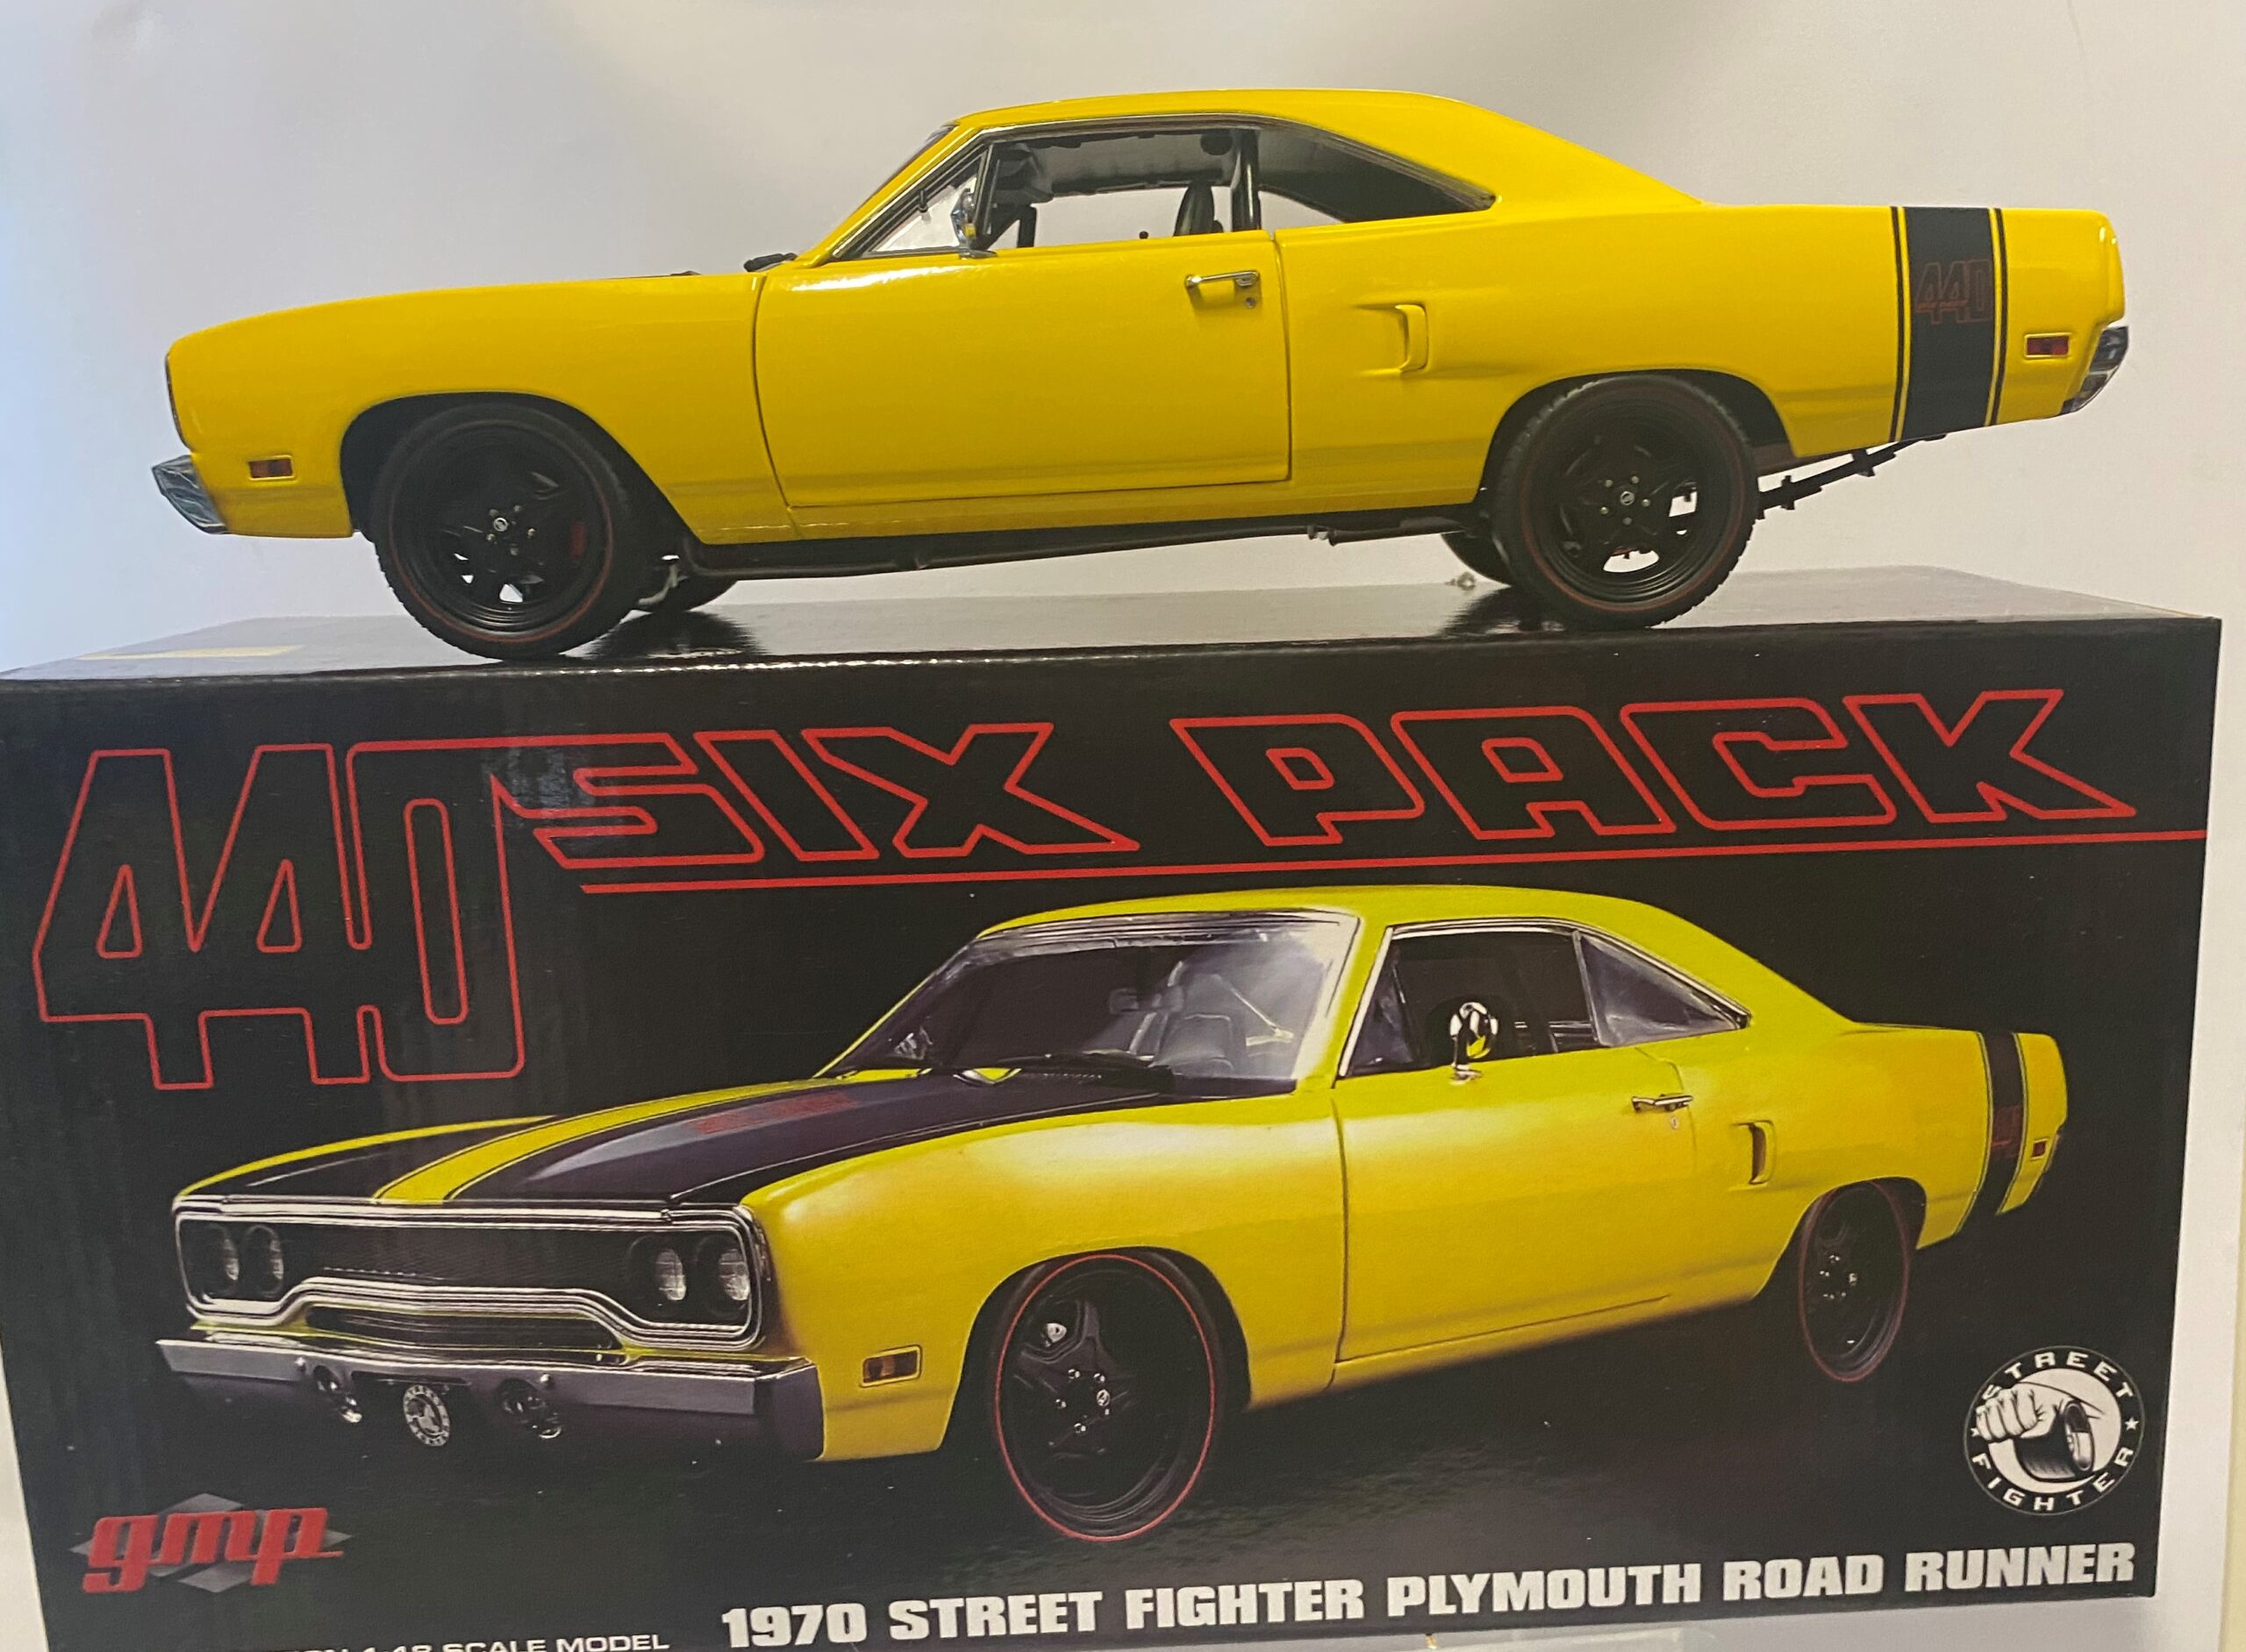 GMP '70 Plymouth Roadrunner 440 Six Pack ( one of 792) 1:18 - Big